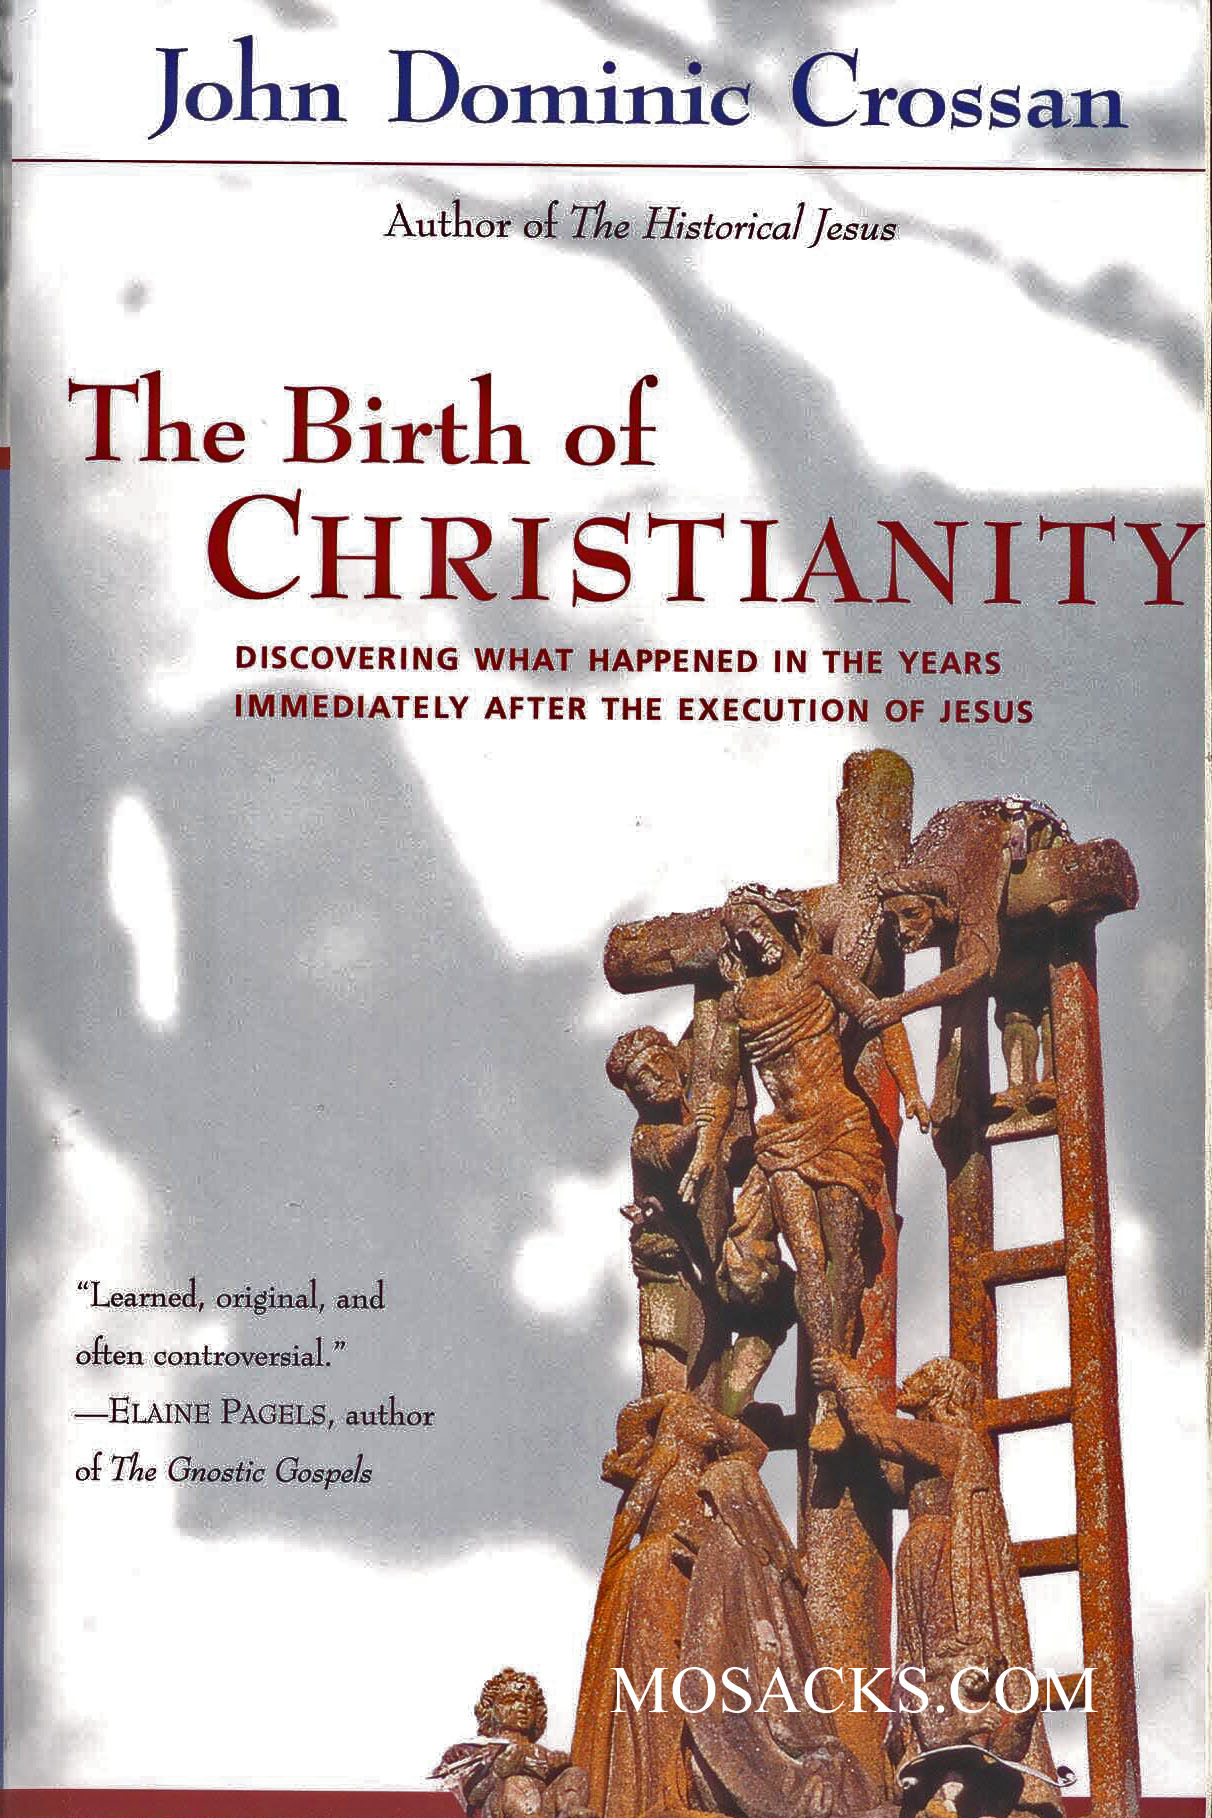 The Birth Of Christianity by John Dominic Crossan